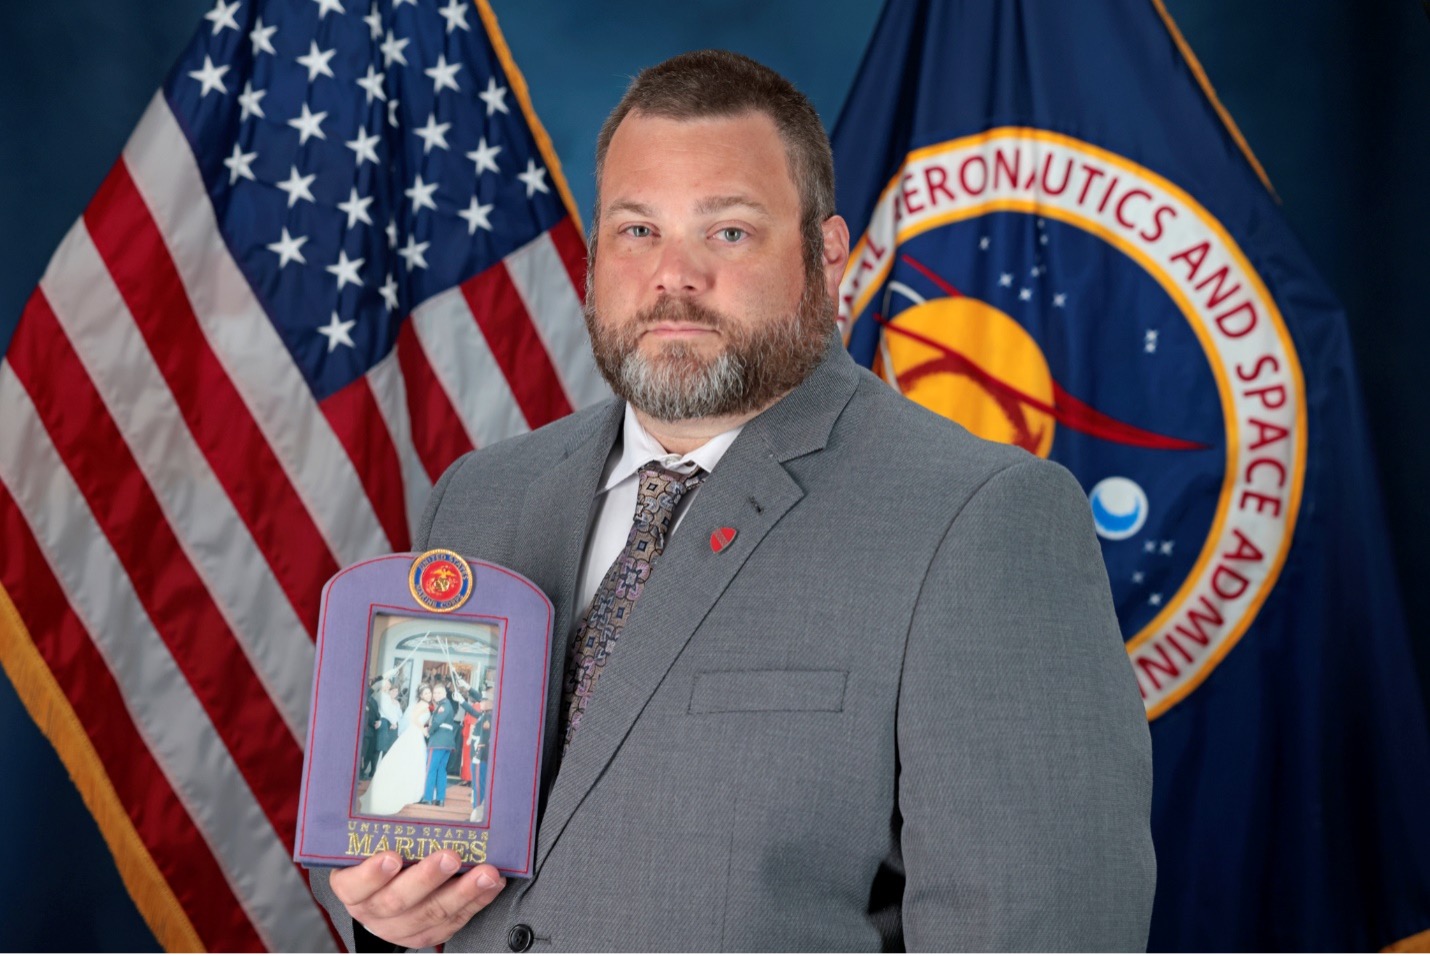 A man in a grey suit holds a photo of his wedding day wearing his military uniform in front of an American flag and a NASA flag.